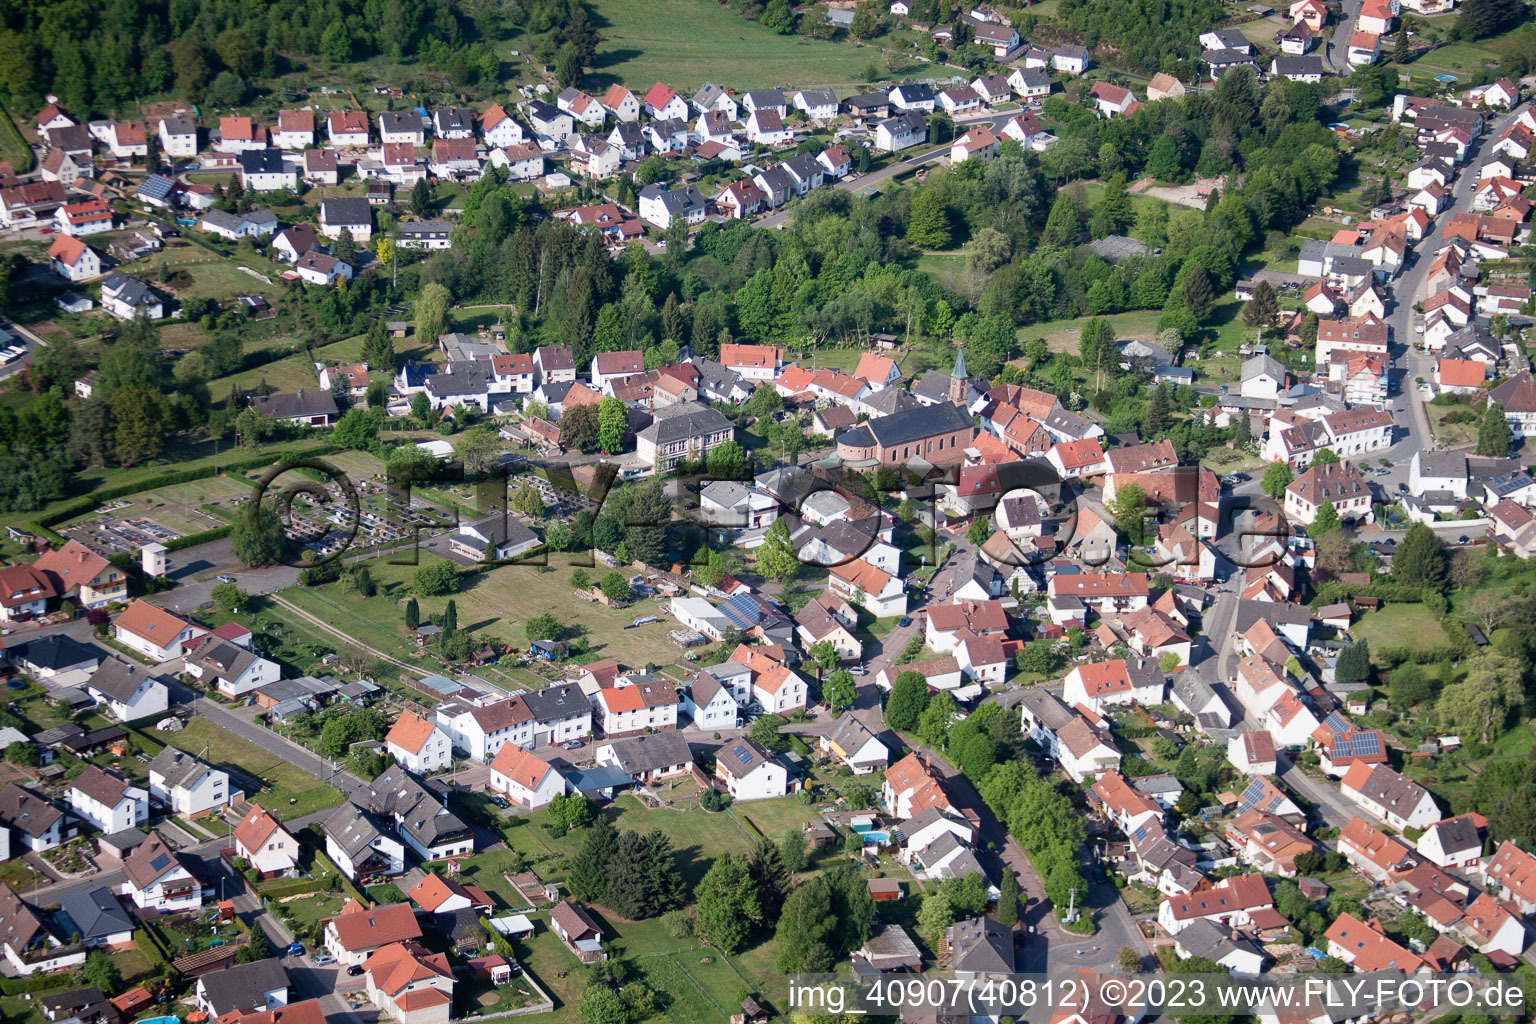 Eppenbrunn in the state Rhineland-Palatinate, Germany seen from above